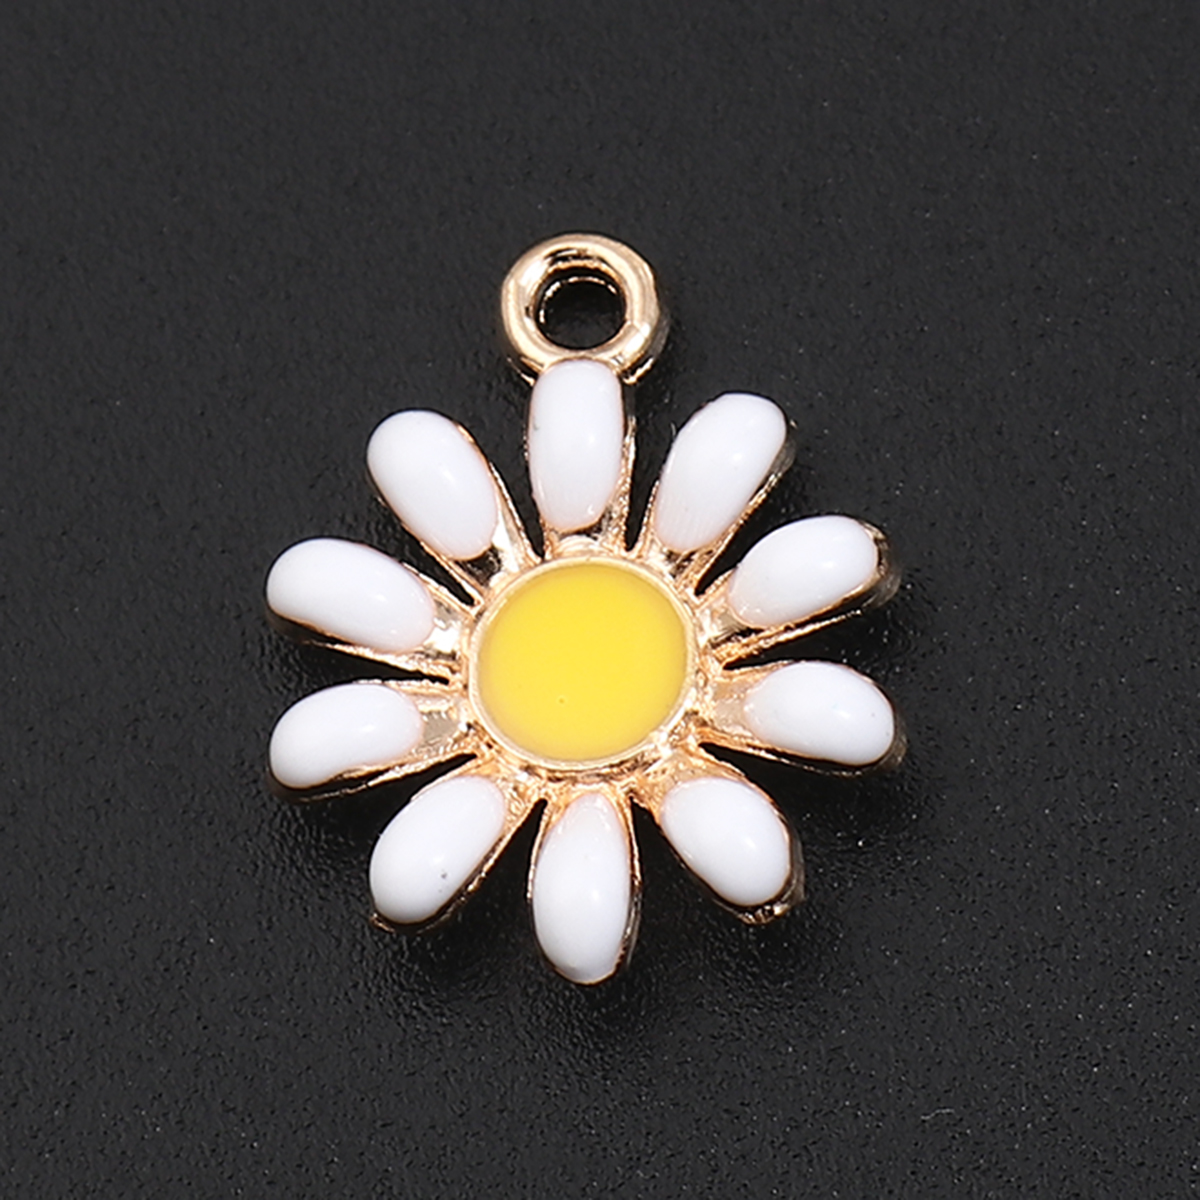 Picture of Zinc Based Alloy Charms Daisy Flower Gold Plated White & Yellow Enamel 16mm x 13mm, 20 PCs